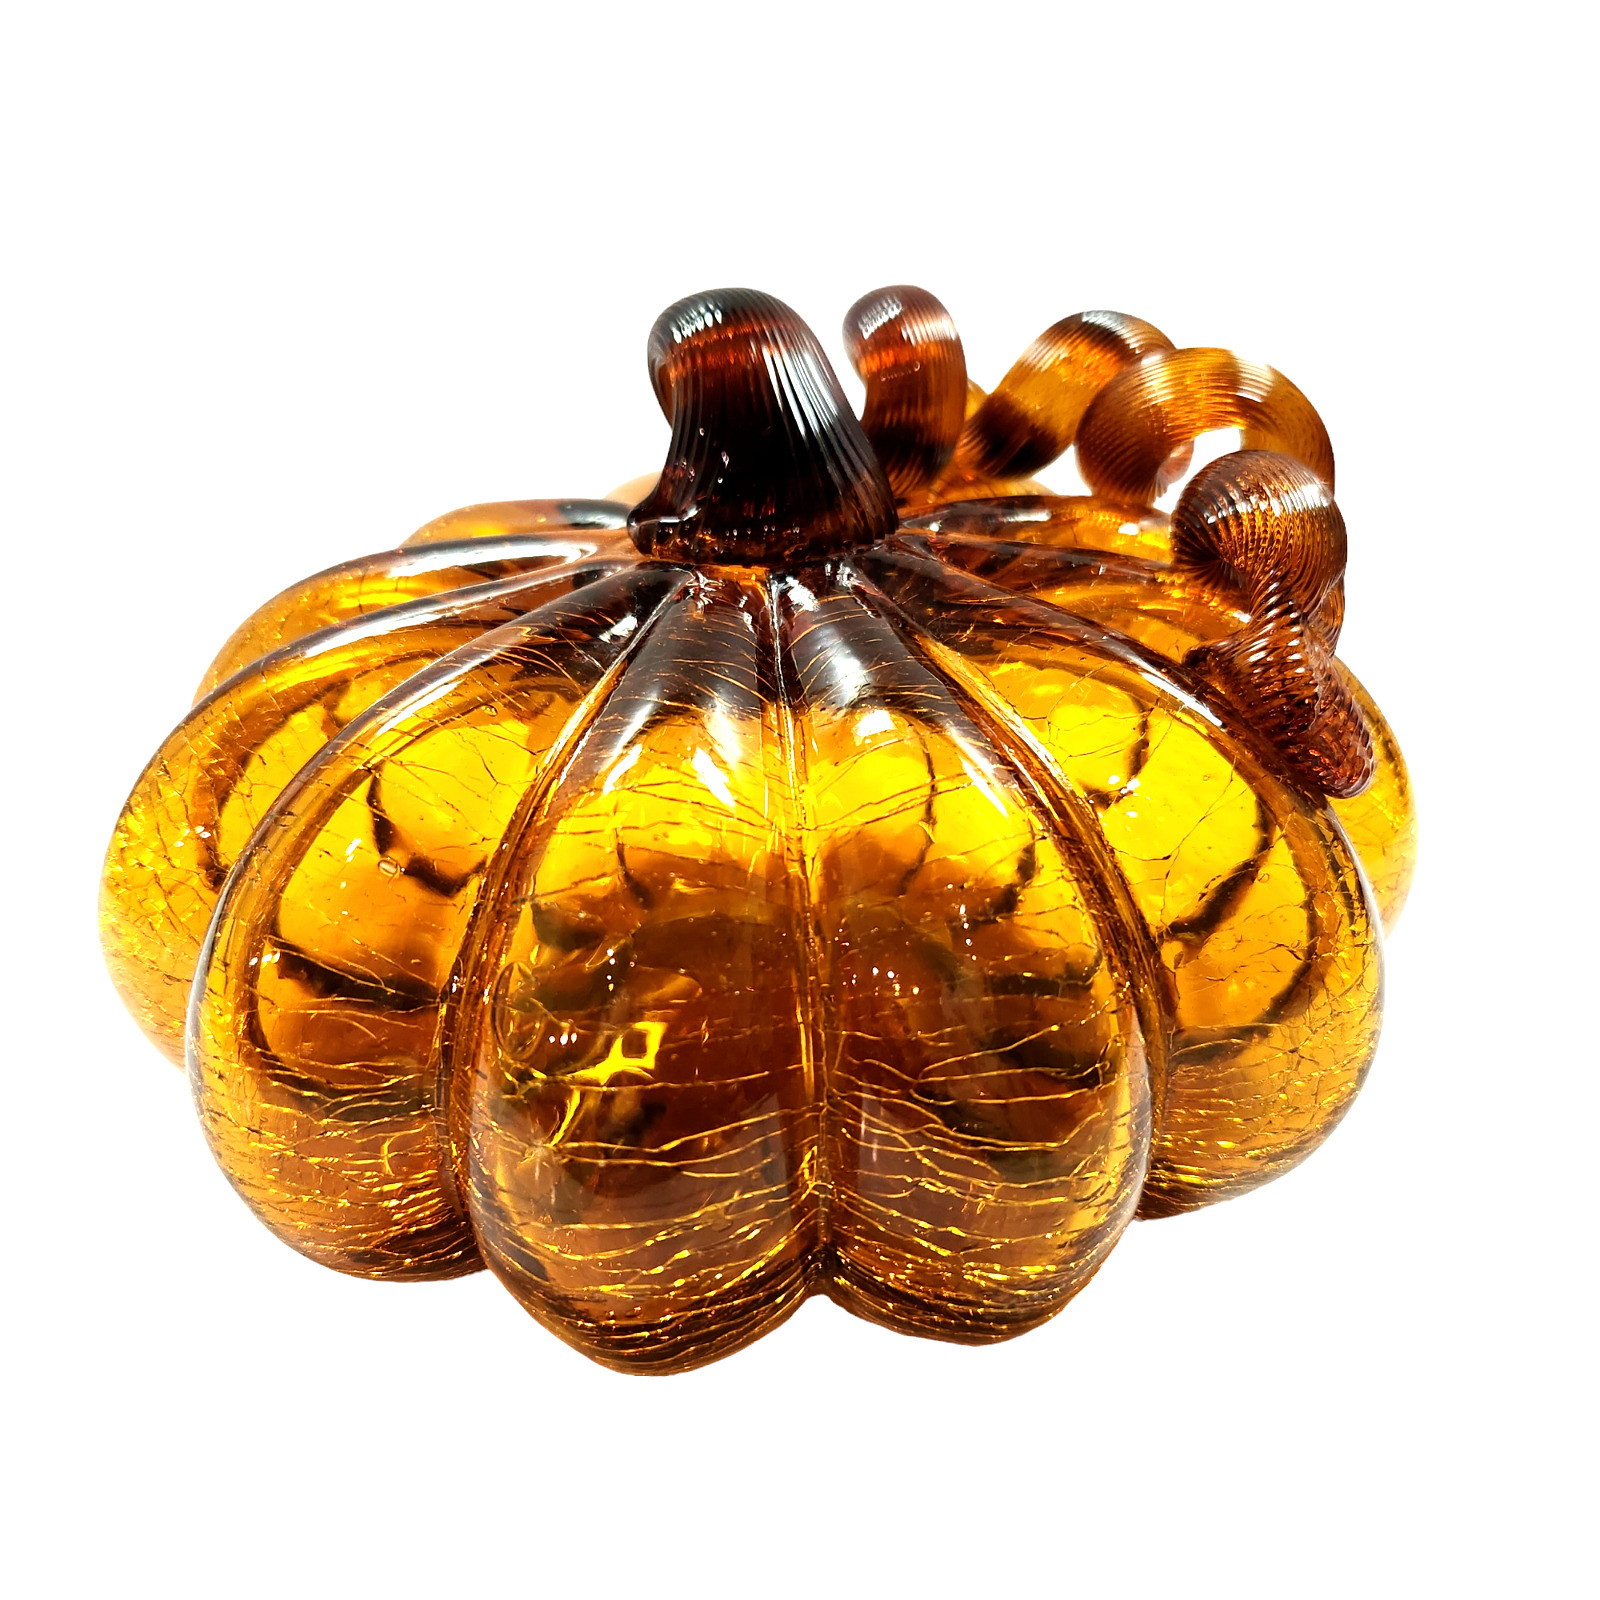 Amber Crackle Glass Pumpkin with Curly Stem 7 Inch Diameter